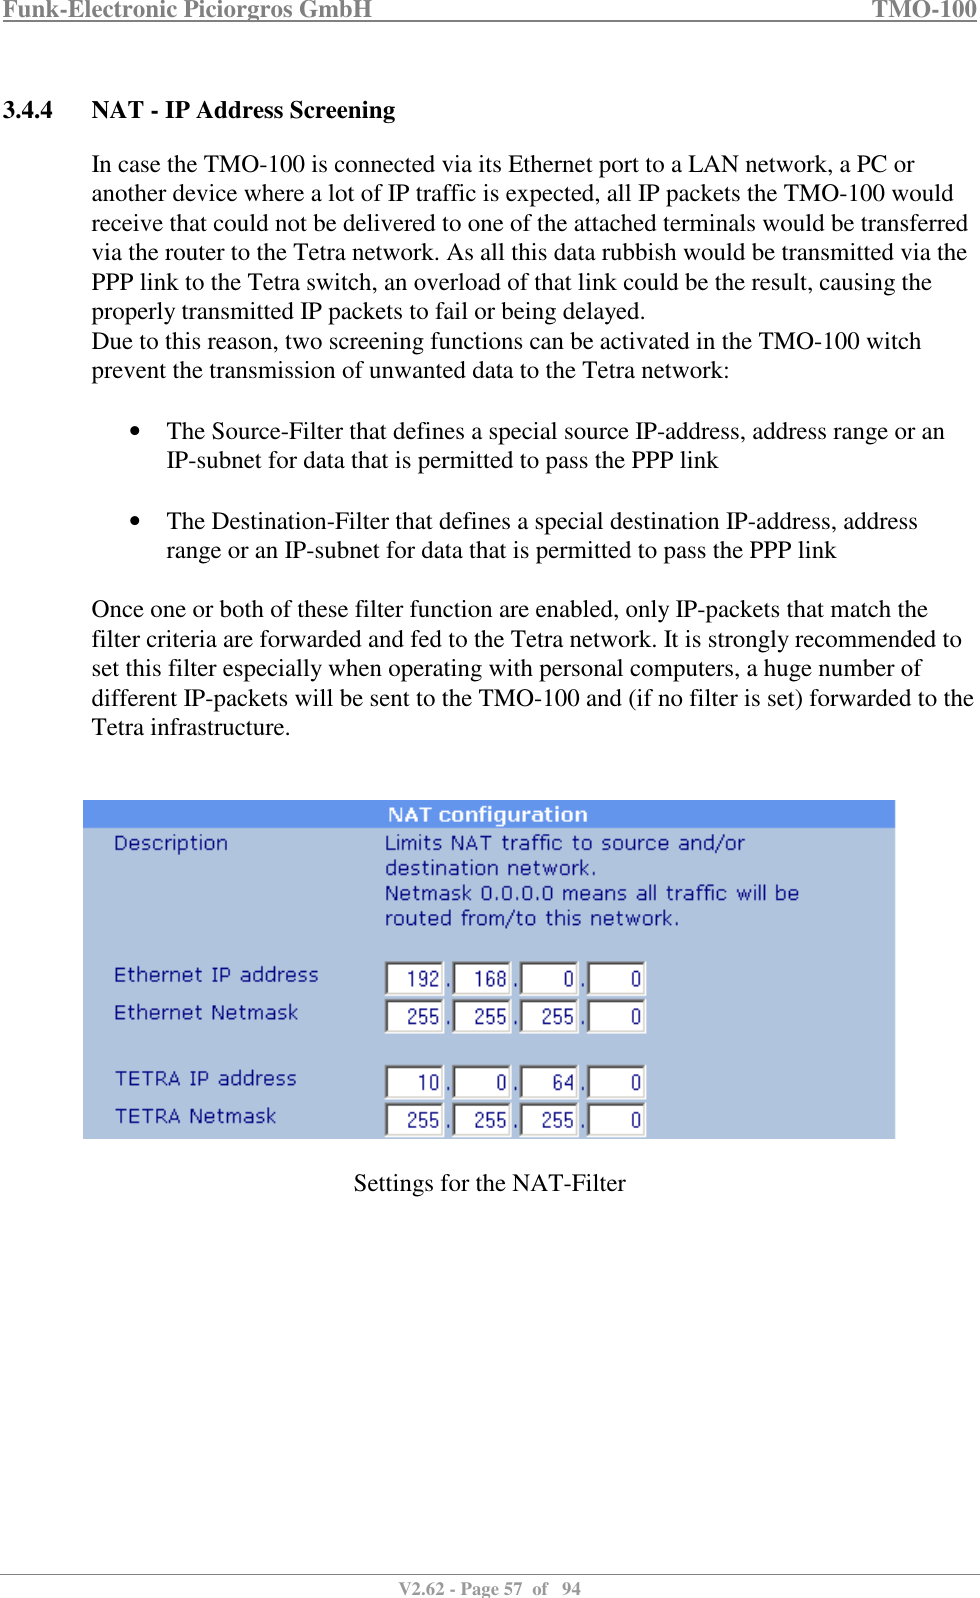 Funk-Electronic Piciorgros GmbH   TMO-100   V2.62 - Page 57  of   94   3.4.4 NAT - IP Address Screening In case the TMO-100 is connected via its Ethernet port to a LAN network, a PC or another device where a lot of IP traffic is expected, all IP packets the TMO-100 would receive that could not be delivered to one of the attached terminals would be transferred via the router to the Tetra network. As all this data rubbish would be transmitted via the PPP link to the Tetra switch, an overload of that link could be the result, causing the properly transmitted IP packets to fail or being delayed. Due to this reason, two screening functions can be activated in the TMO-100 witch prevent the transmission of unwanted data to the Tetra network:  • The Source-Filter that defines a special source IP-address, address range or an IP-subnet for data that is permitted to pass the PPP link  • The Destination-Filter that defines a special destination IP-address, address range or an IP-subnet for data that is permitted to pass the PPP link  Once one or both of these filter function are enabled, only IP-packets that match the filter criteria are forwarded and fed to the Tetra network. It is strongly recommended to set this filter especially when operating with personal computers, a huge number of different IP-packets will be sent to the TMO-100 and (if no filter is set) forwarded to the Tetra infrastructure.      Settings for the NAT-Filter   